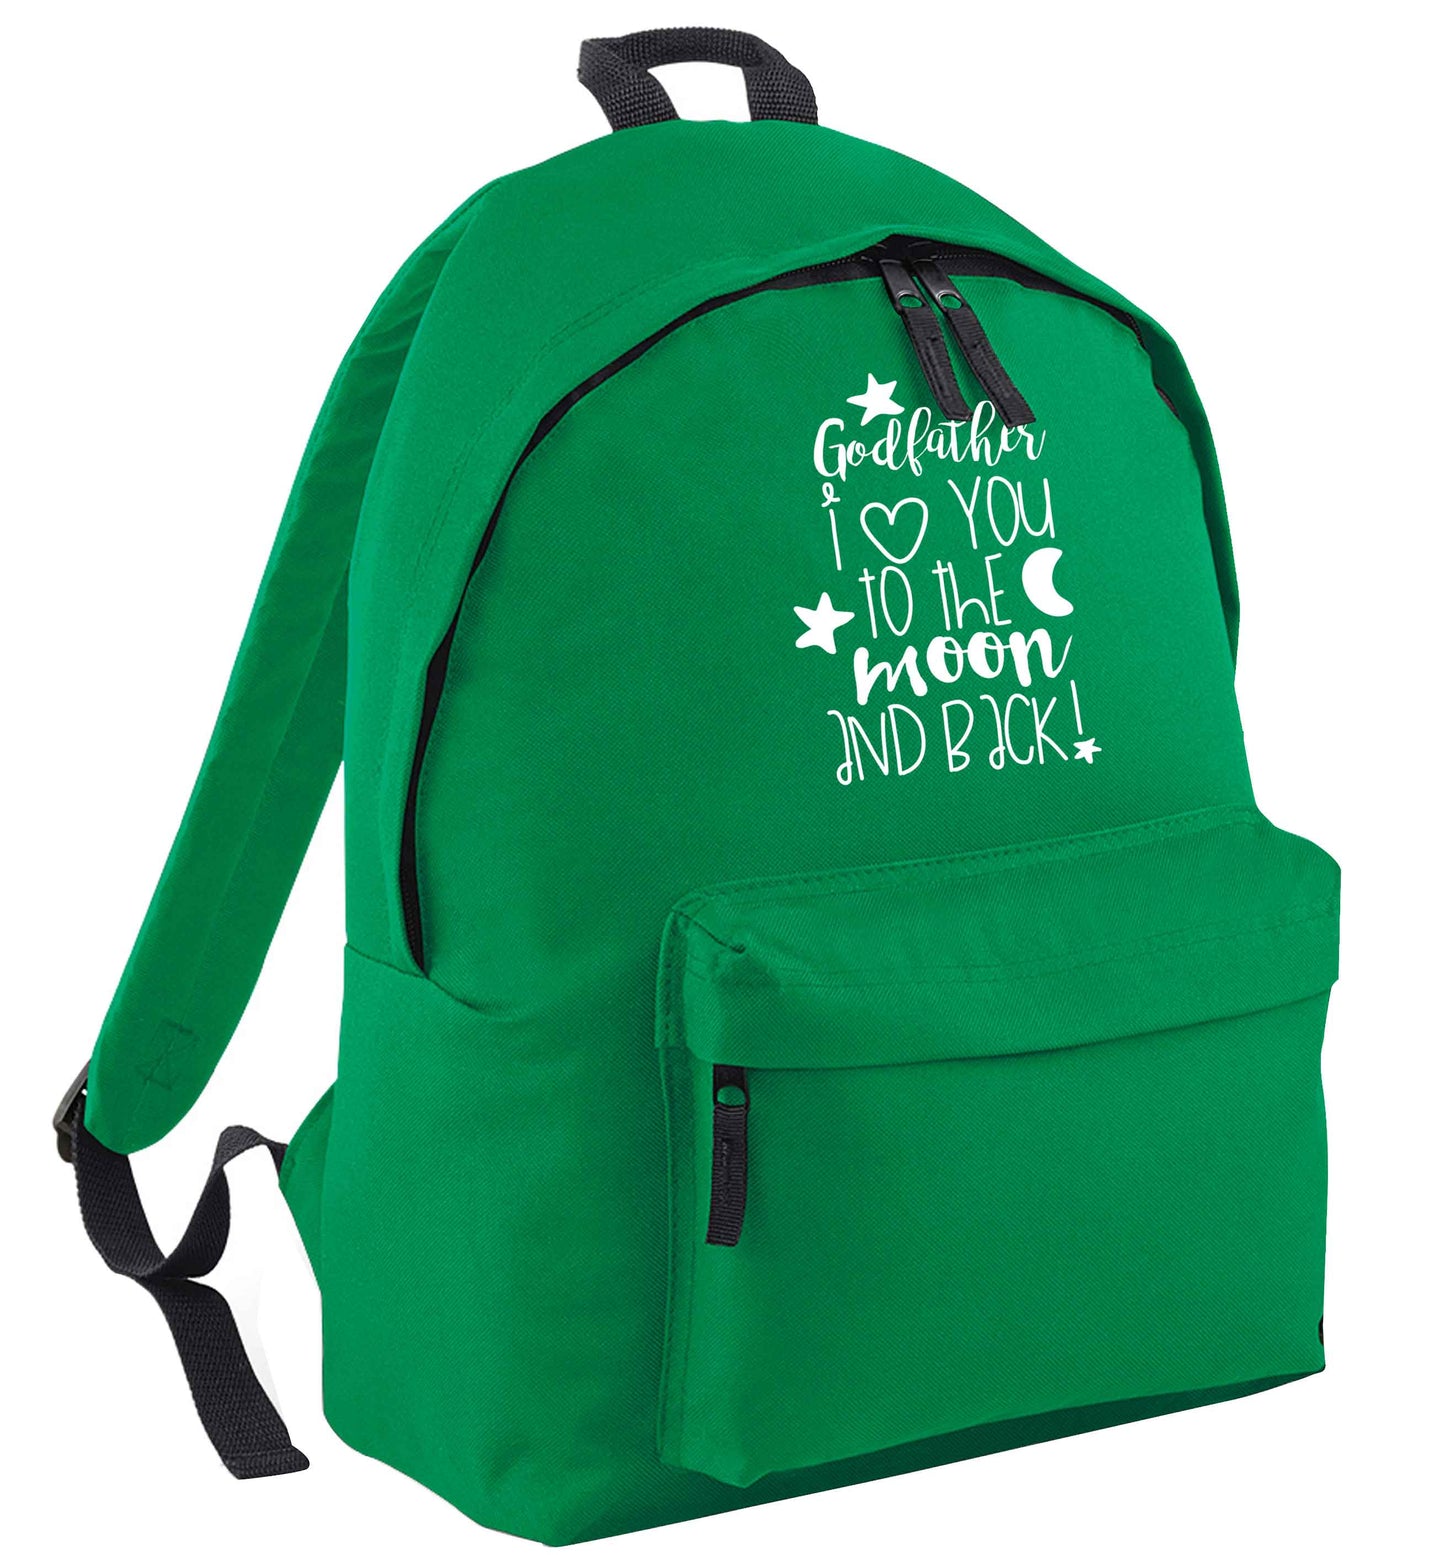 Godfather I love you to the moon and back green adults backpack